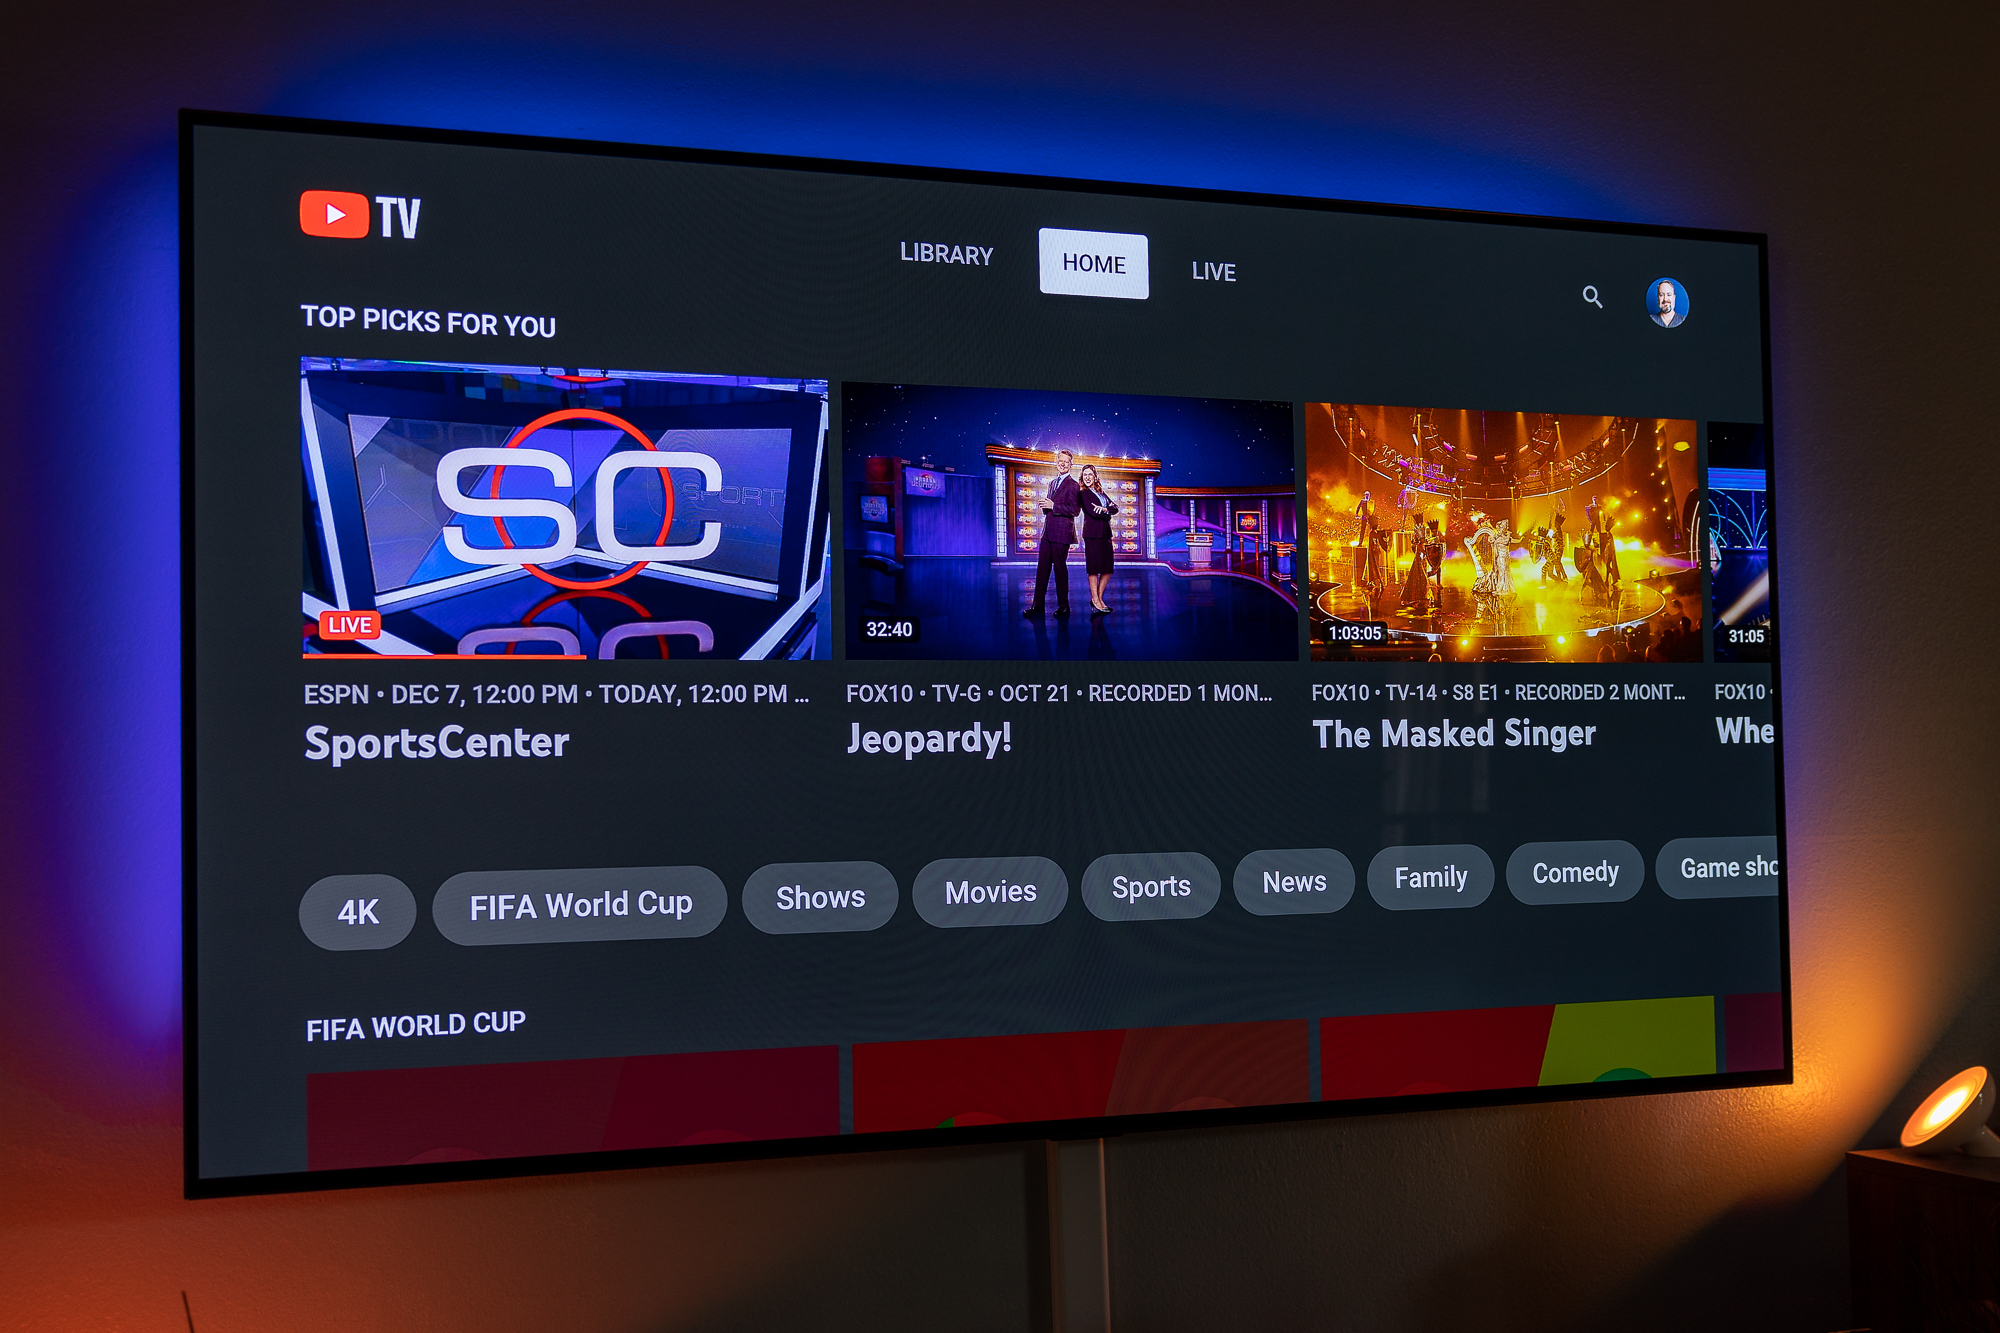 Youtube Tv: Plans, Pricing, Channels, How To Cancel | Digital Trends